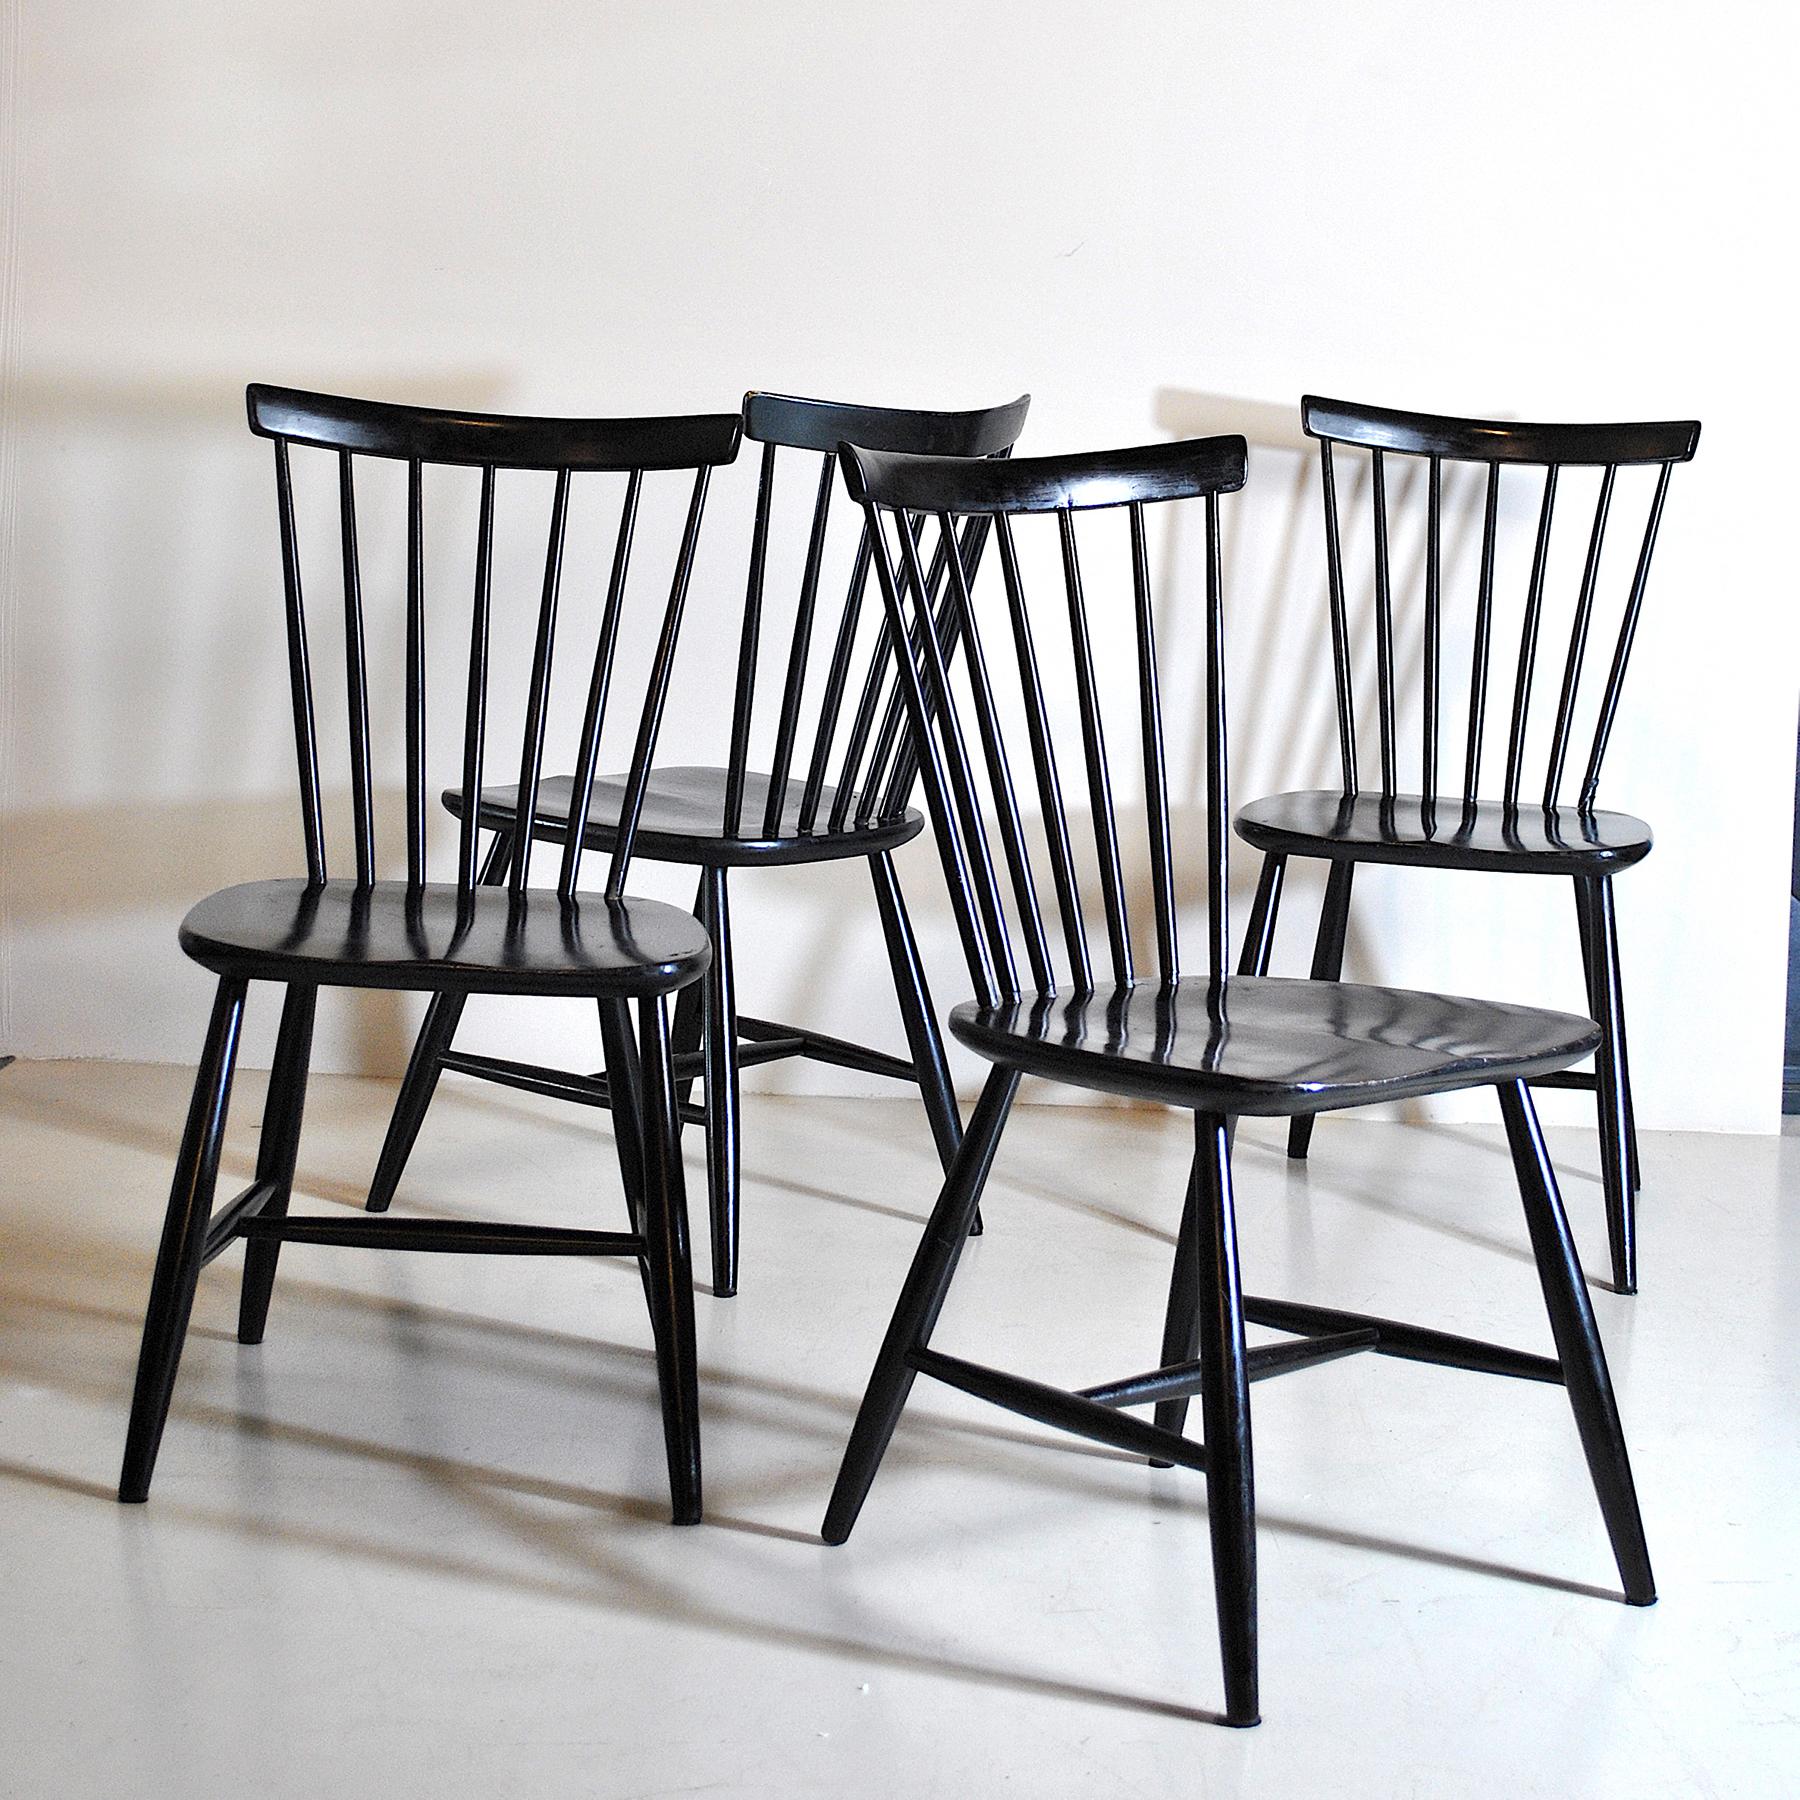 Mid-20th Century Haga Fors Chairs Scandinavian Style For Sale